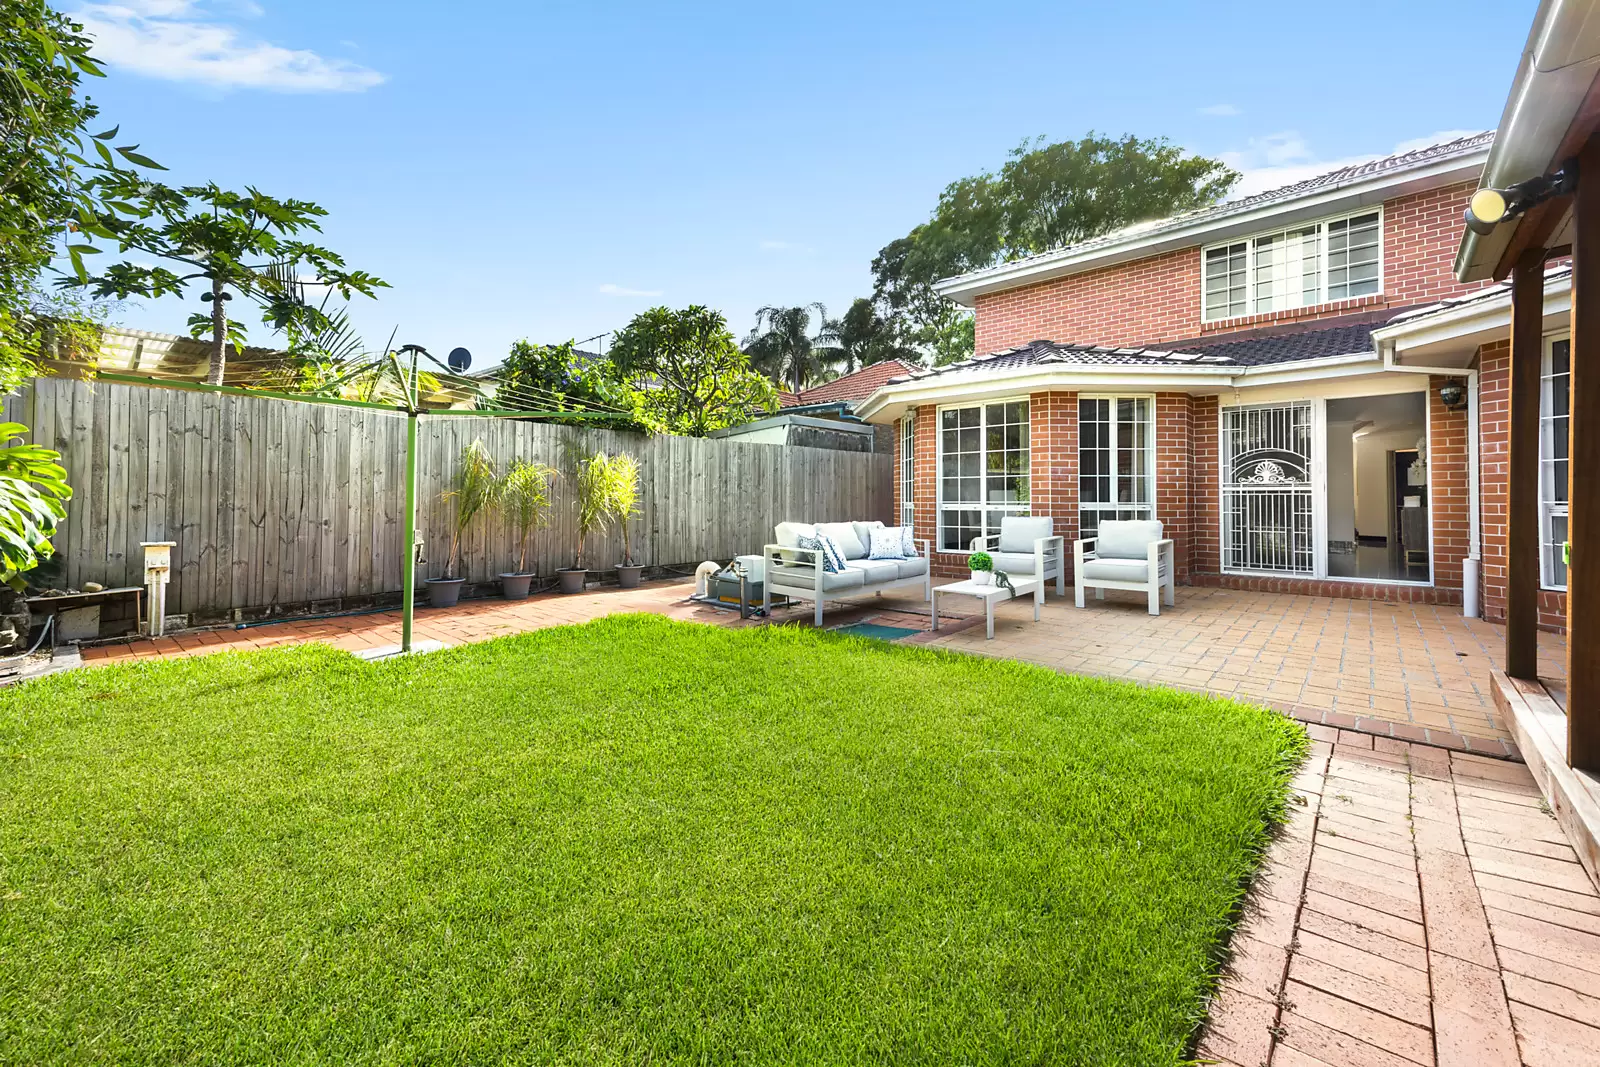 Photo #2: 32 Percival Street, Maroubra - Auction by Sydney Sotheby's International Realty